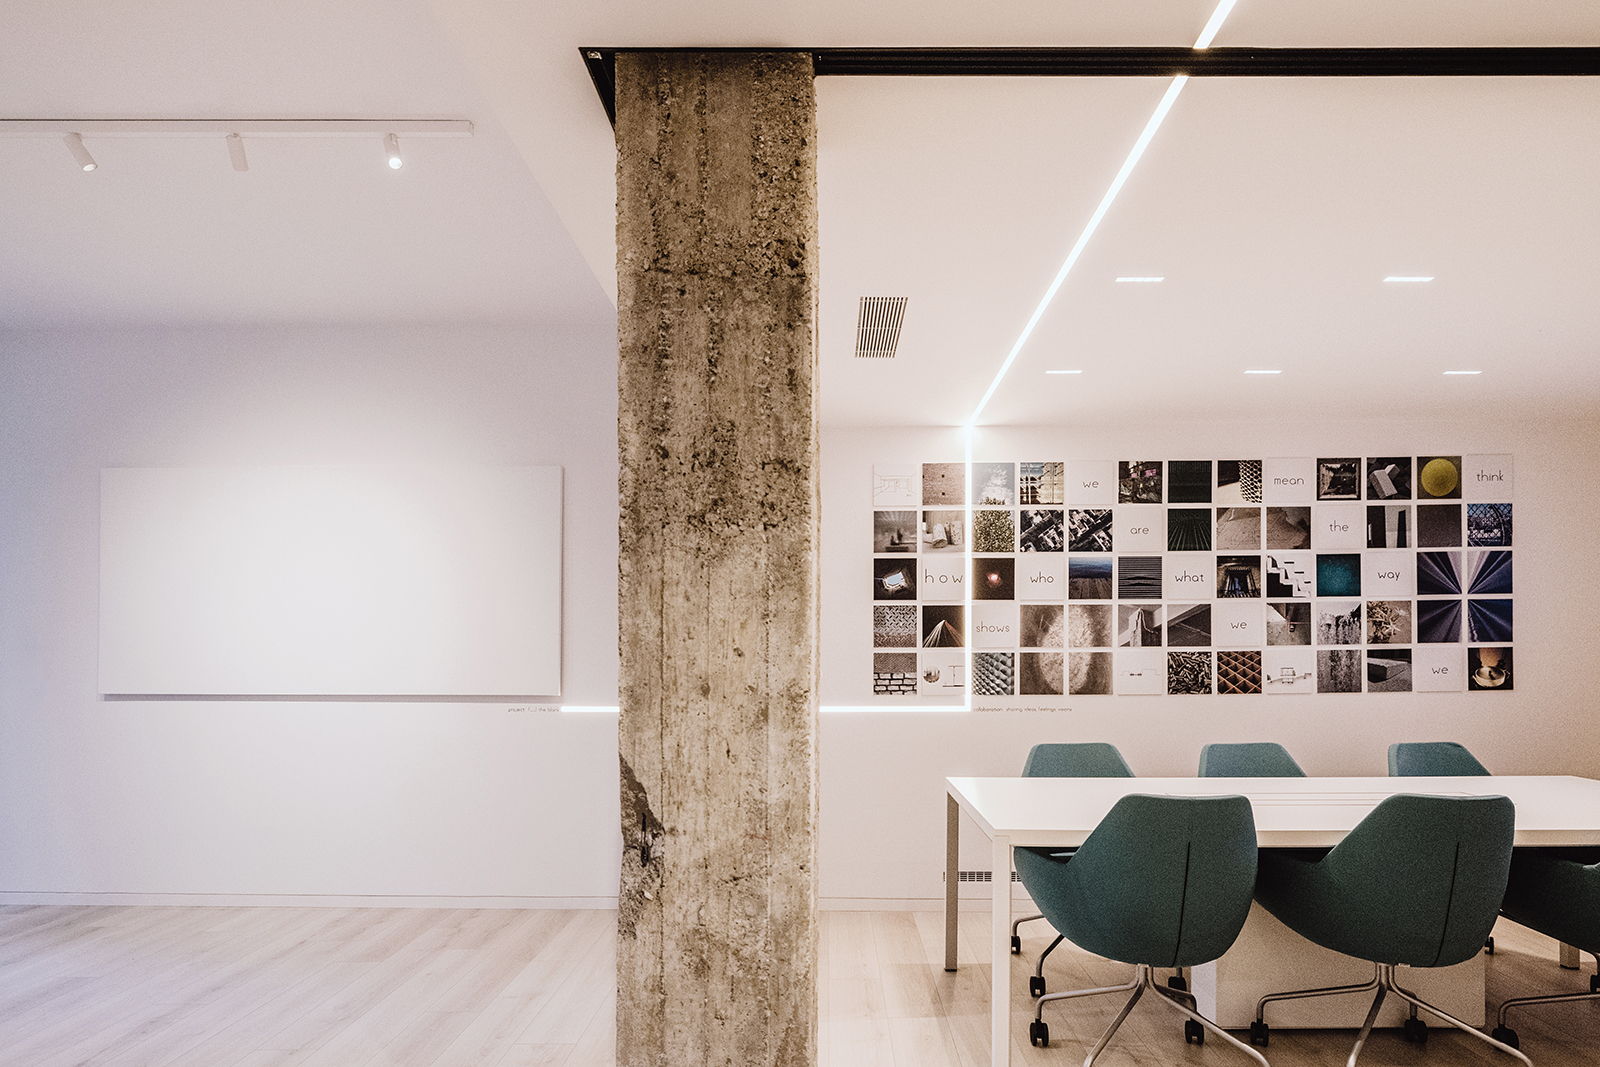 Archisearch PATH: how architects present their office space in Thessaloniki, Greece